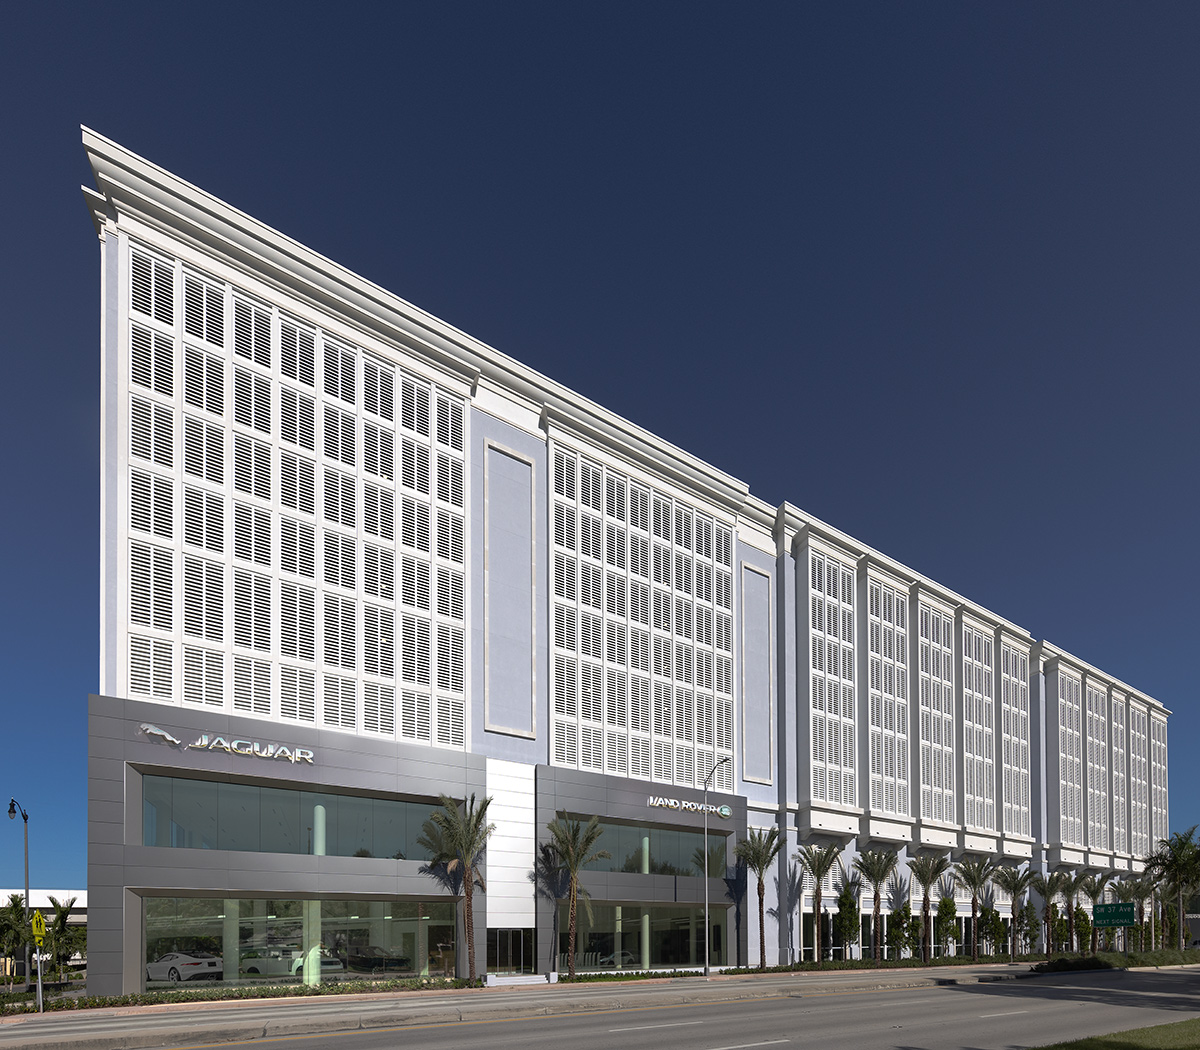 Architectural view of the Miami Jaguar - Land Rover dealership.